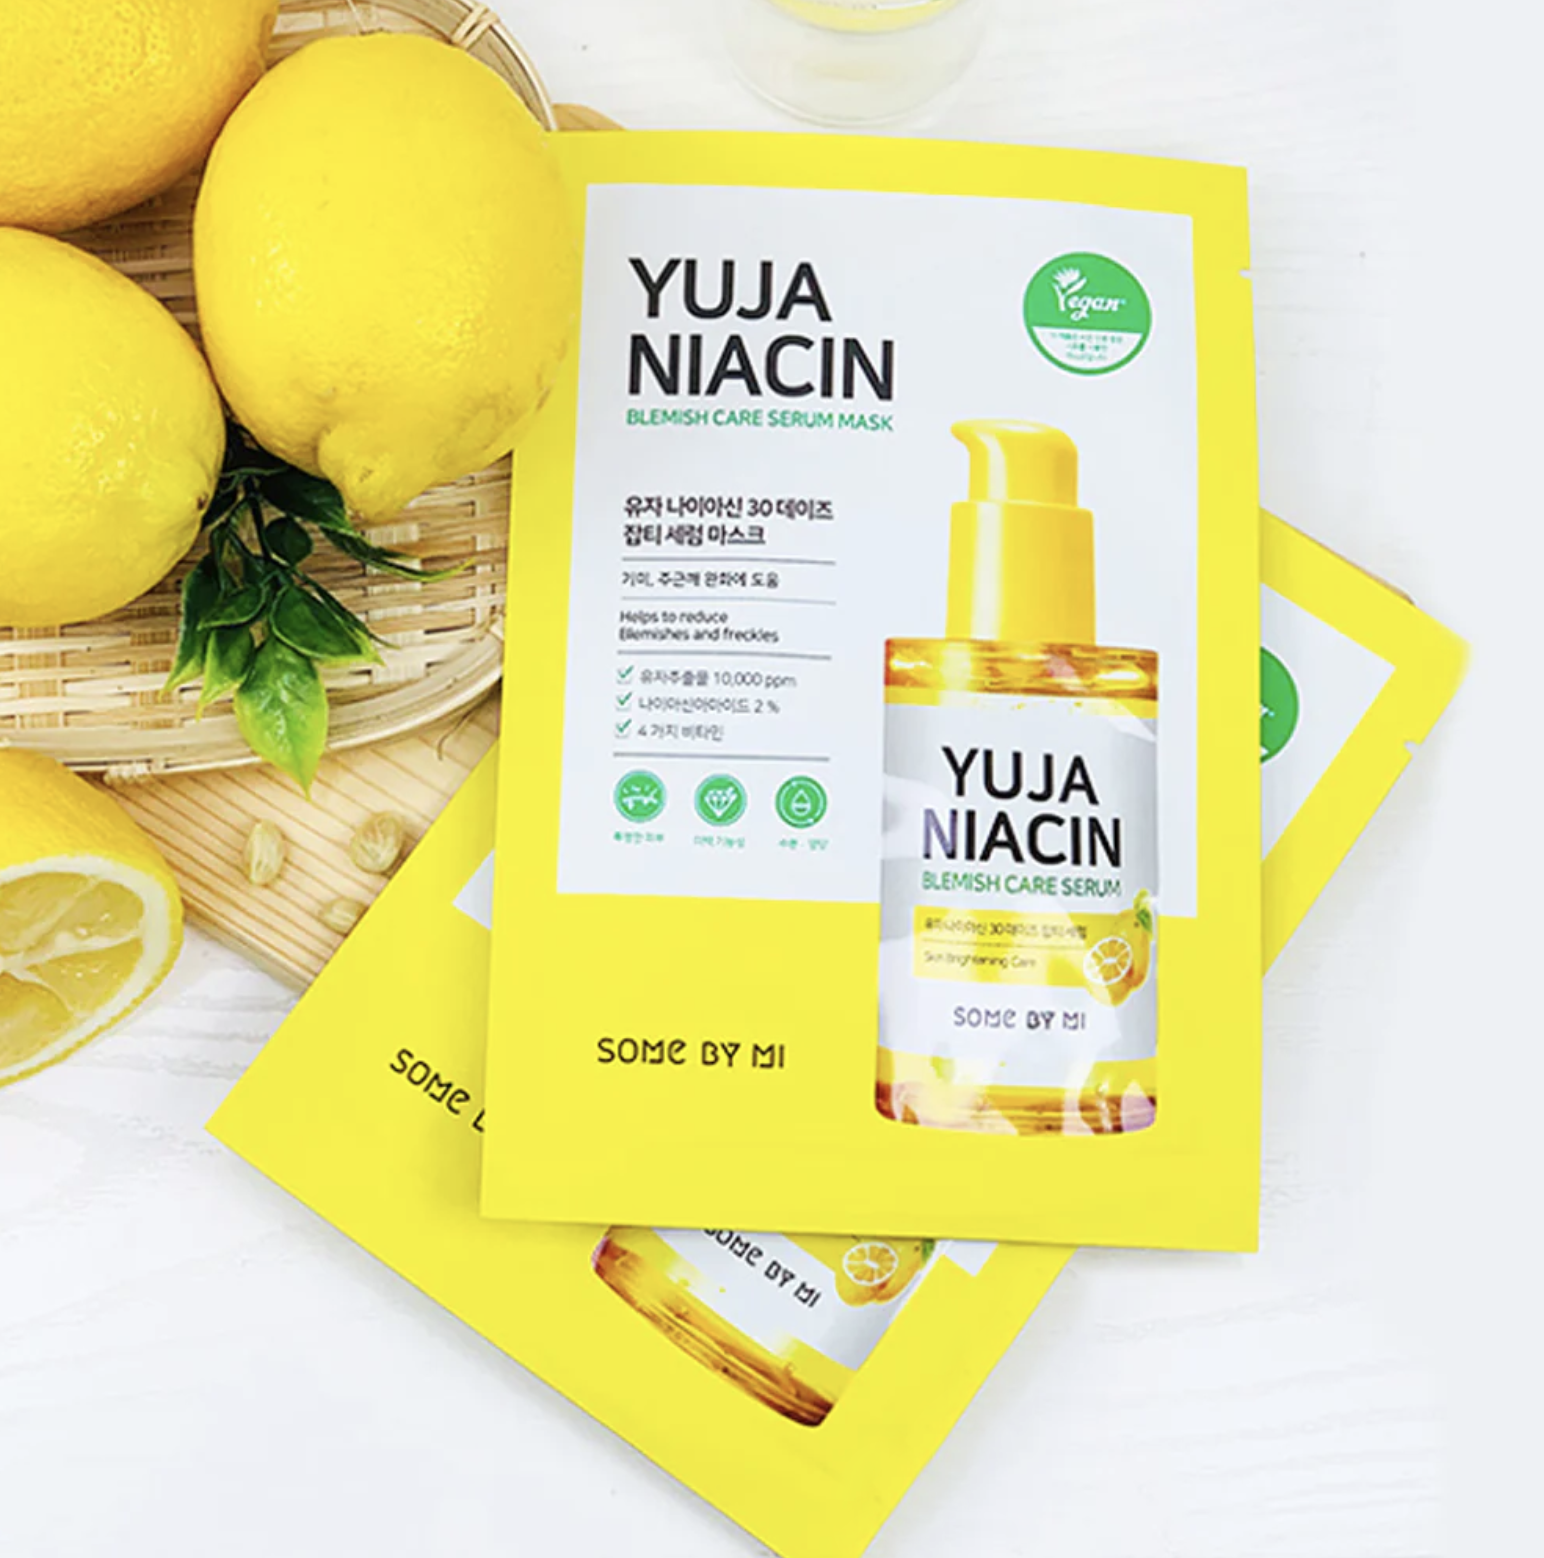 Some By Mi Yuja Niacin 30 Days Blemish Care Serum Mask - 1 Pack of 10 Sheets